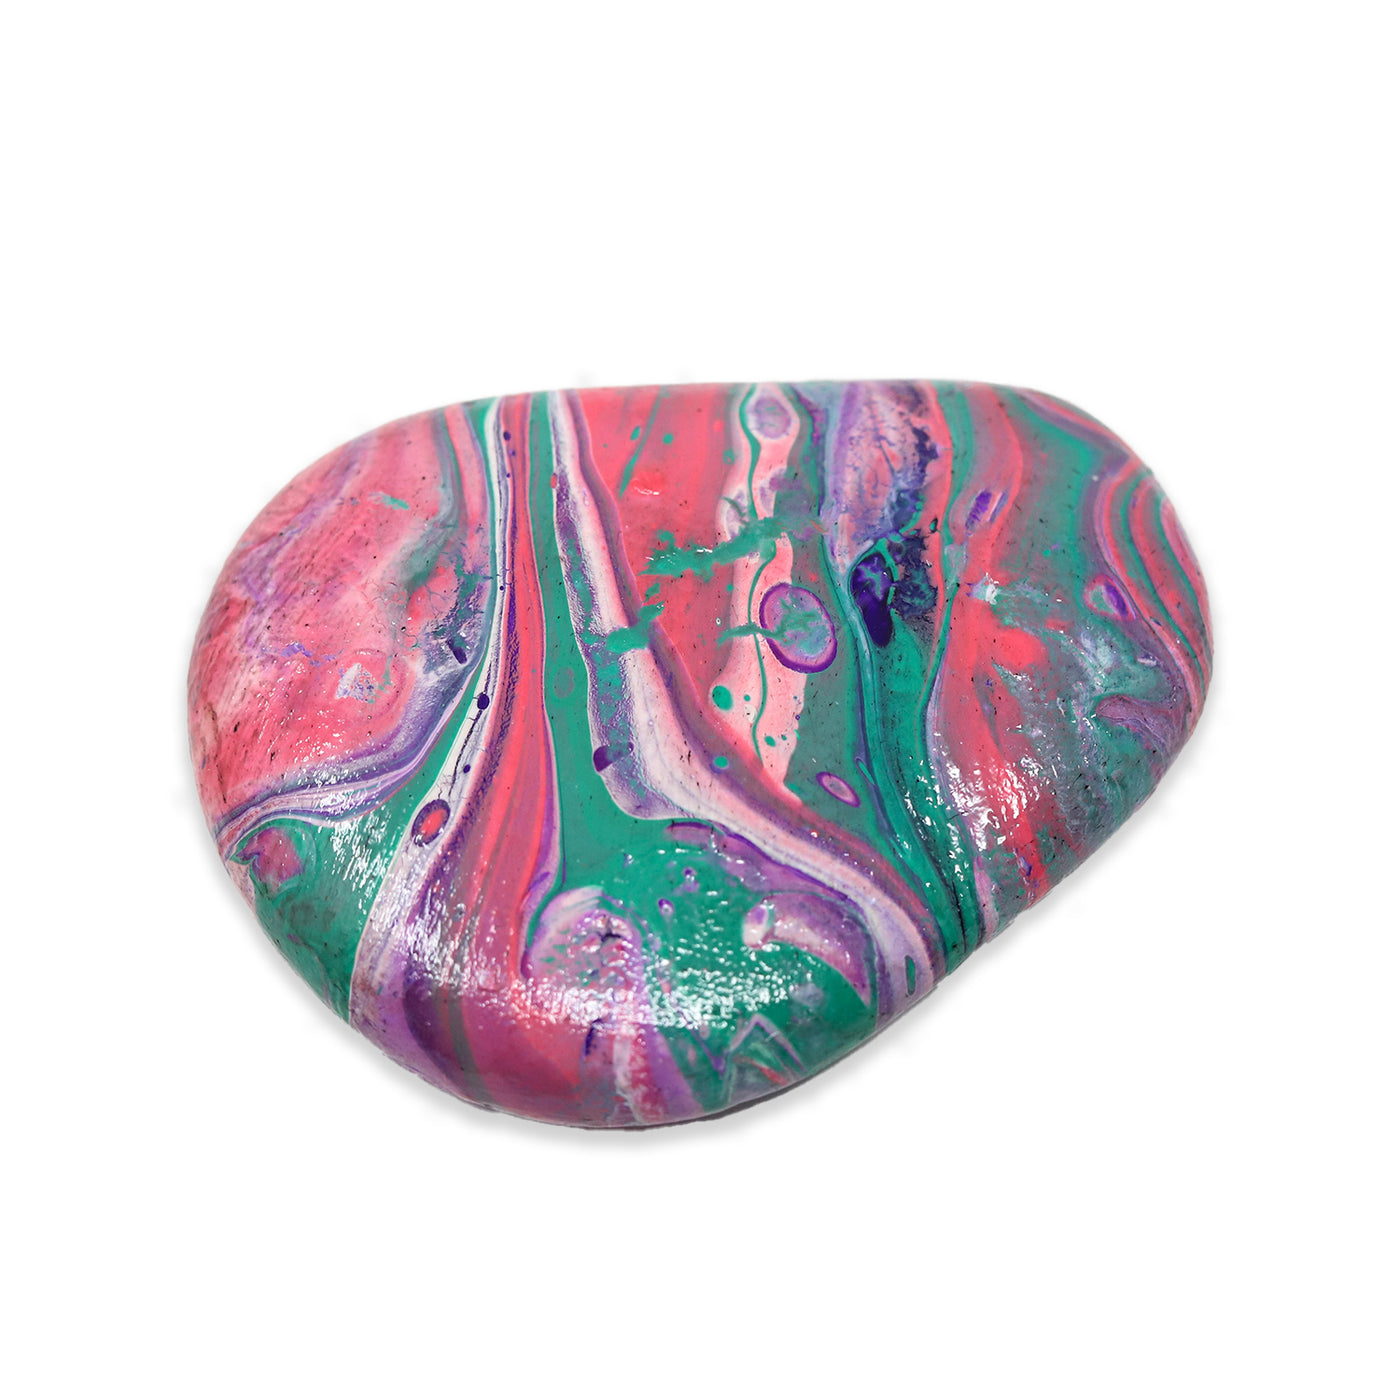 Acrylic Poured Painted Rock #2